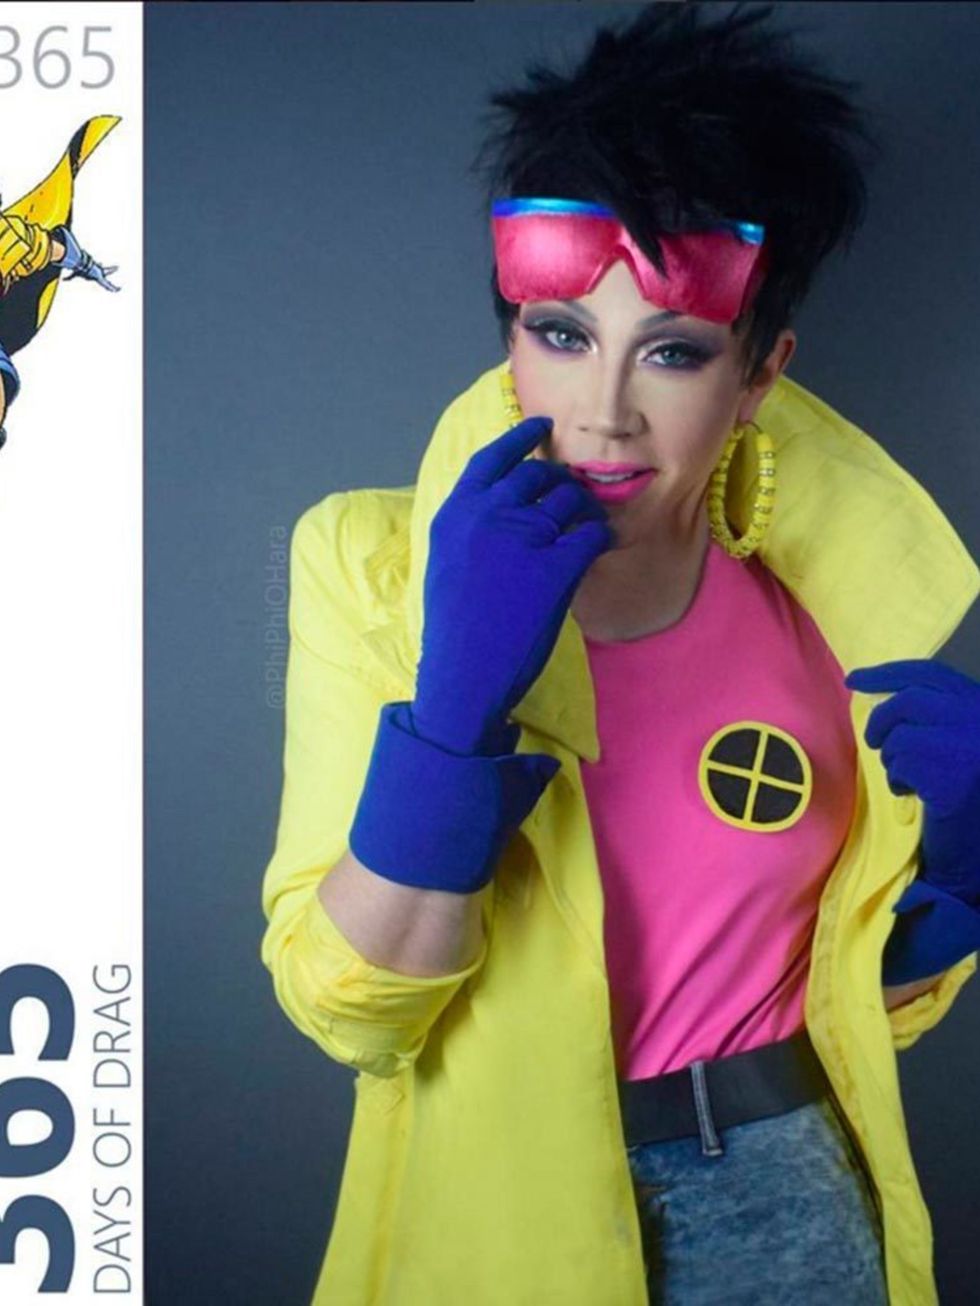 <p>Jubilee from the X-Men</p>